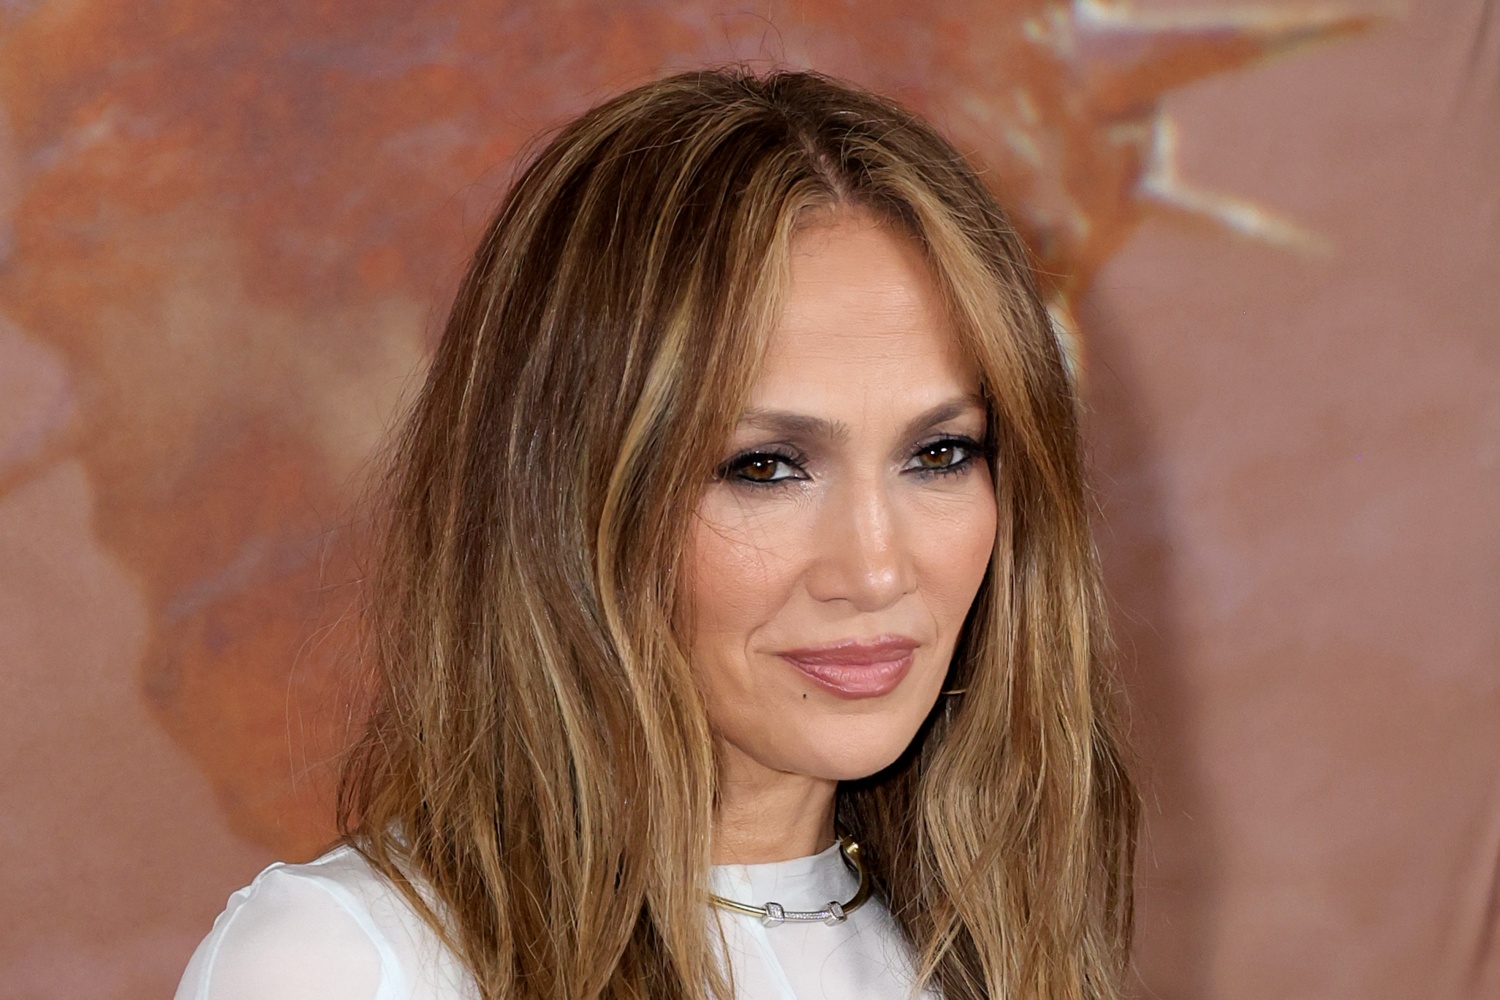 Jennifer Lopez ‘begs’ to save marriage but Ben Affleck rejects plea for second chance: Report